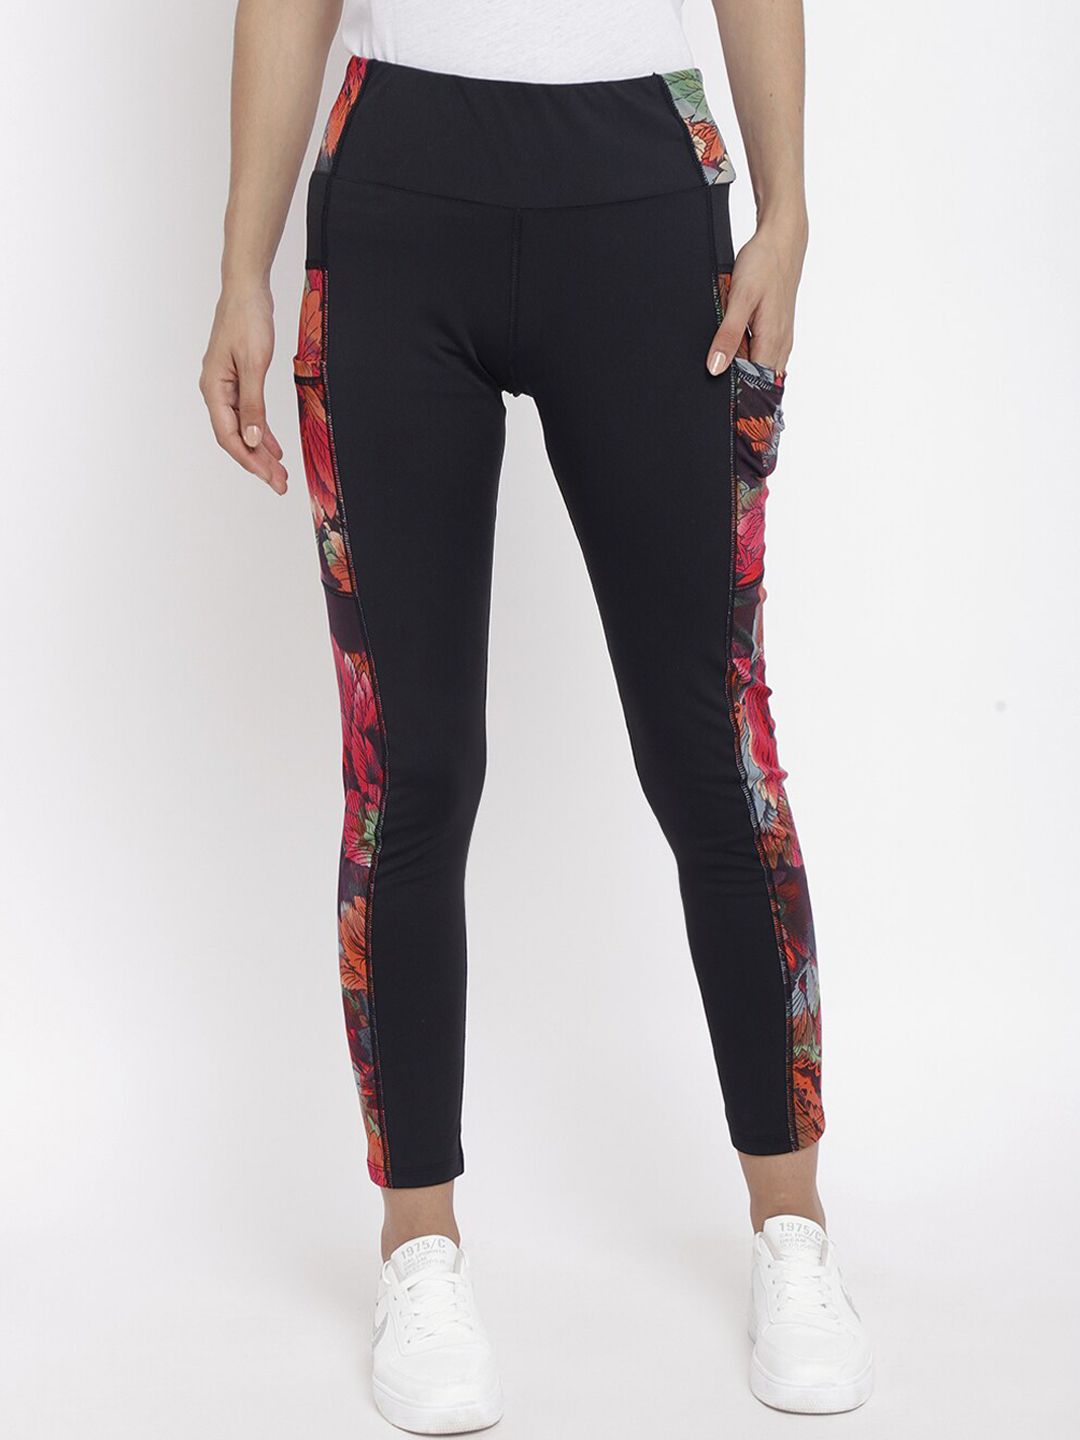 Chkokko Women Black & Red Printed Stretchable Yoga Tights Price in India